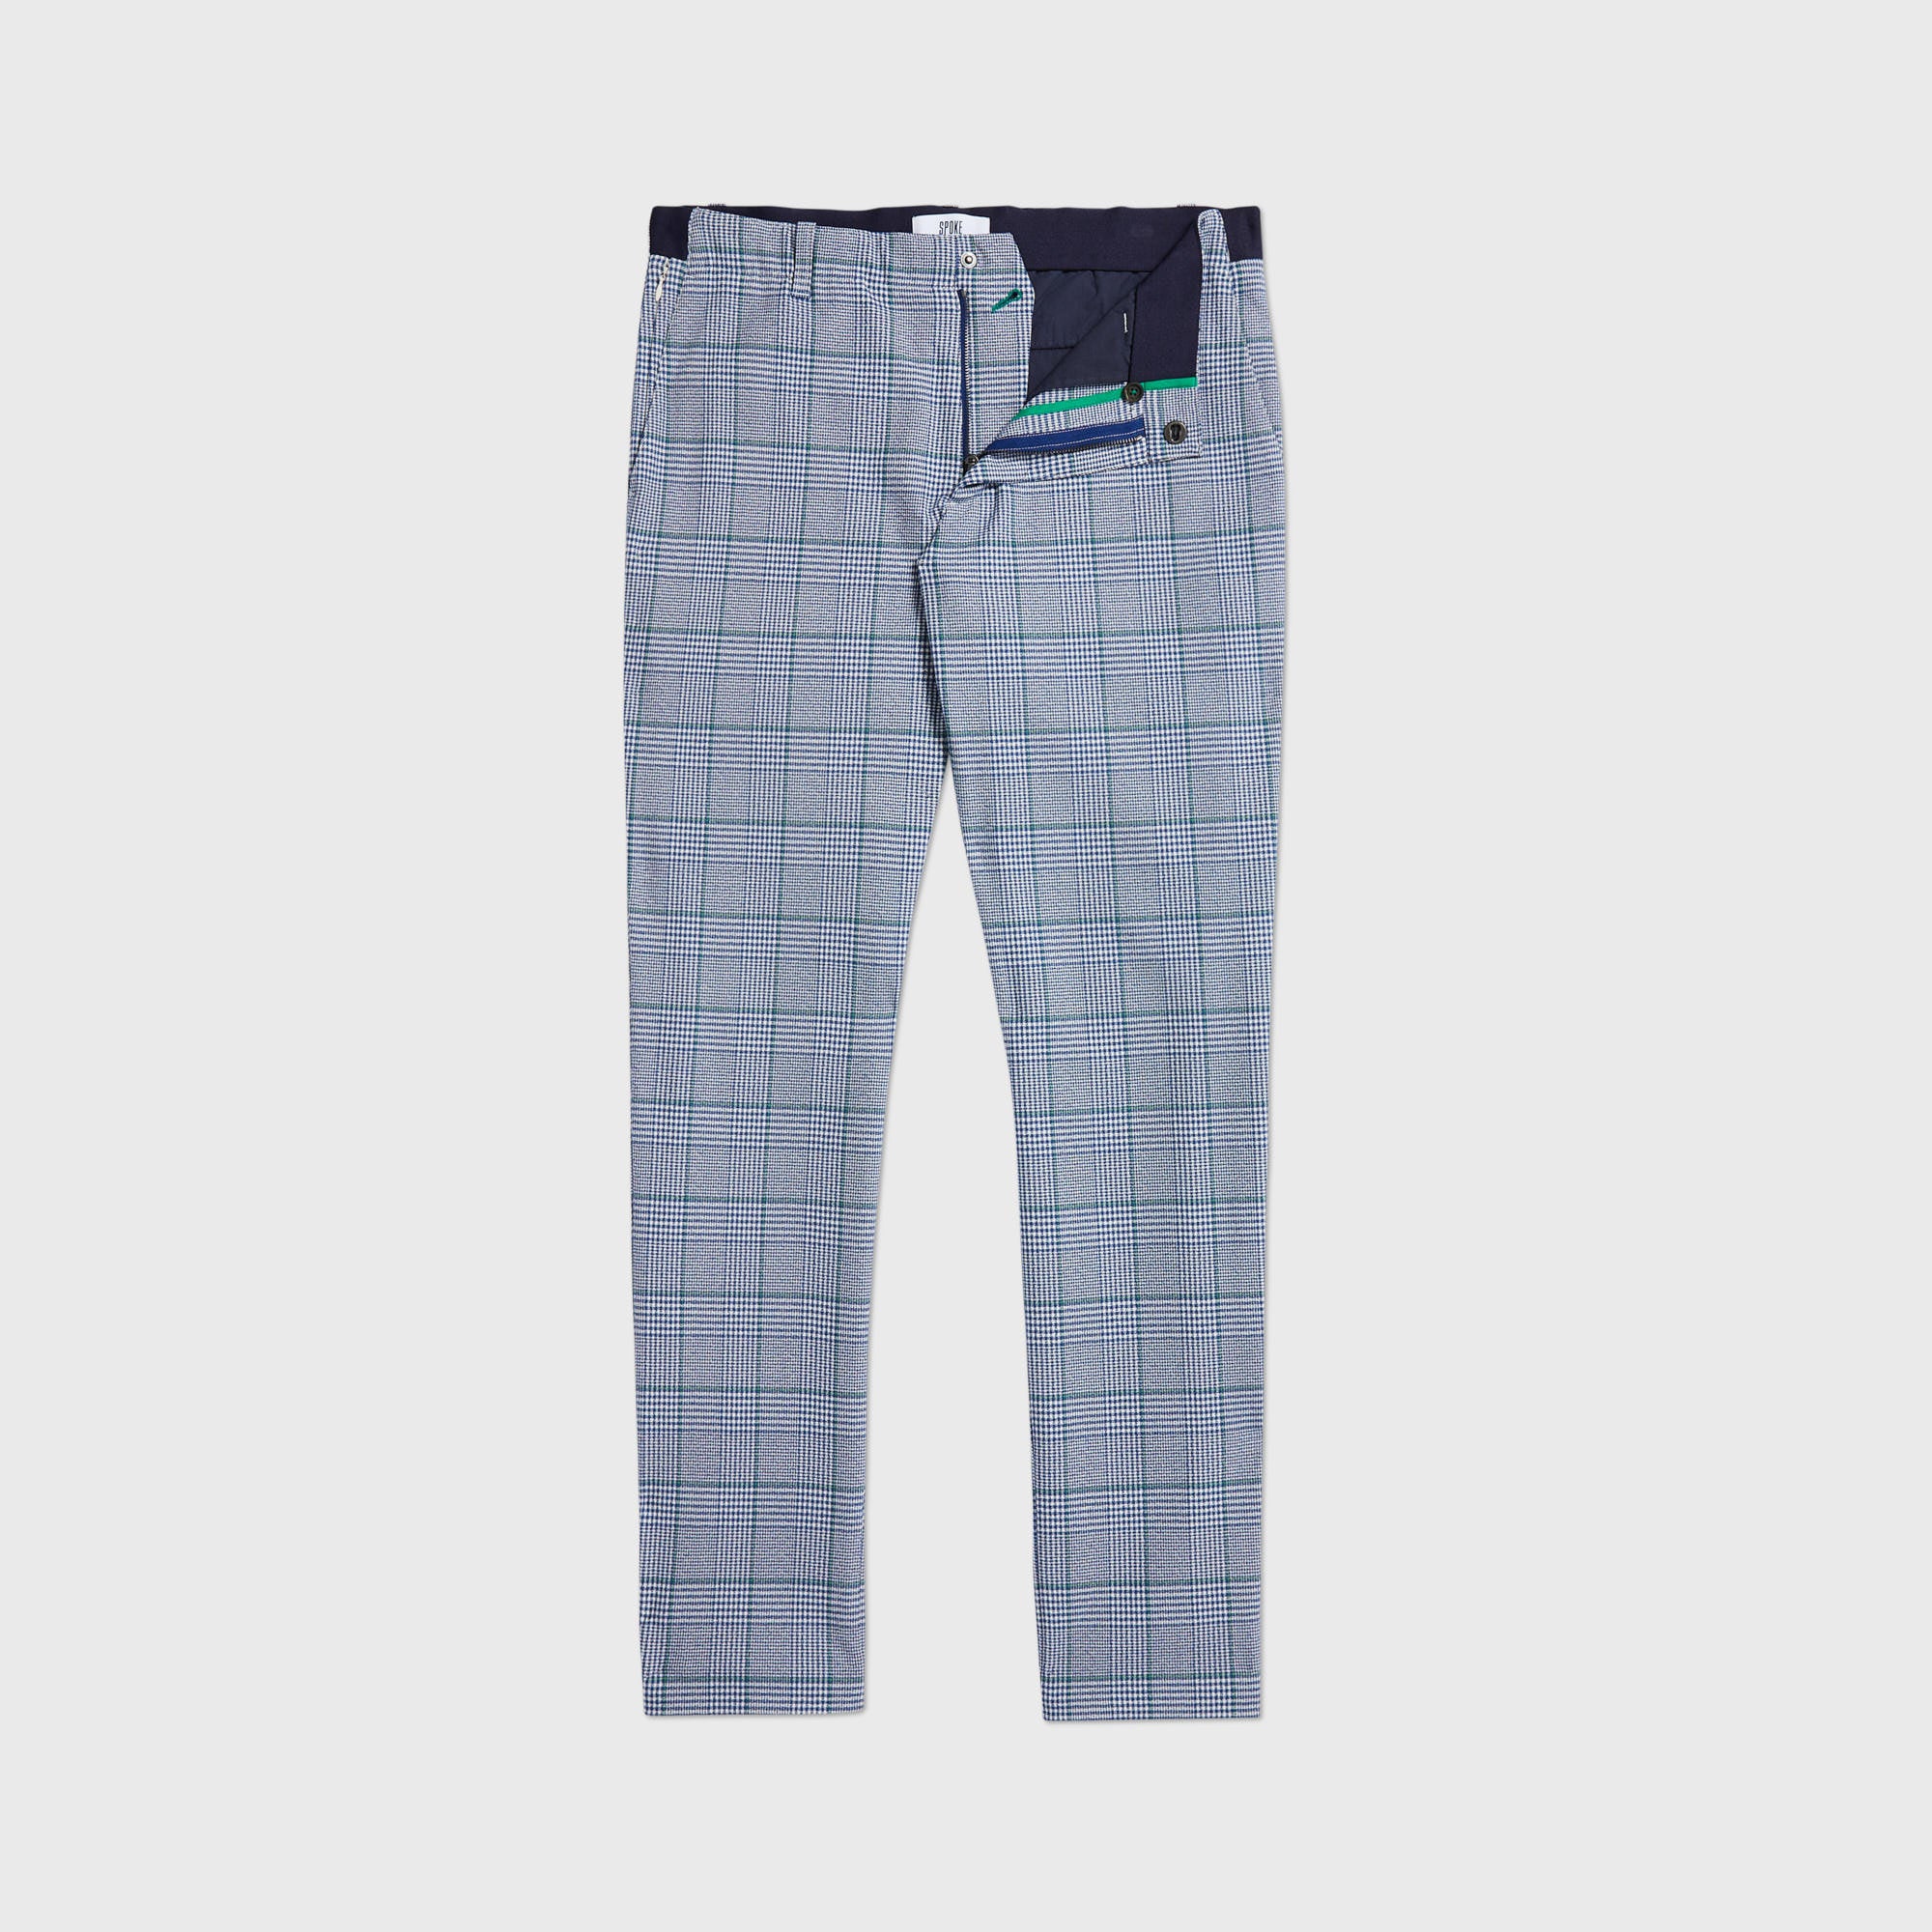 GOLFINO Classic ladies golf trousers in an attractive check pattern with  viscose shop online  Golfino